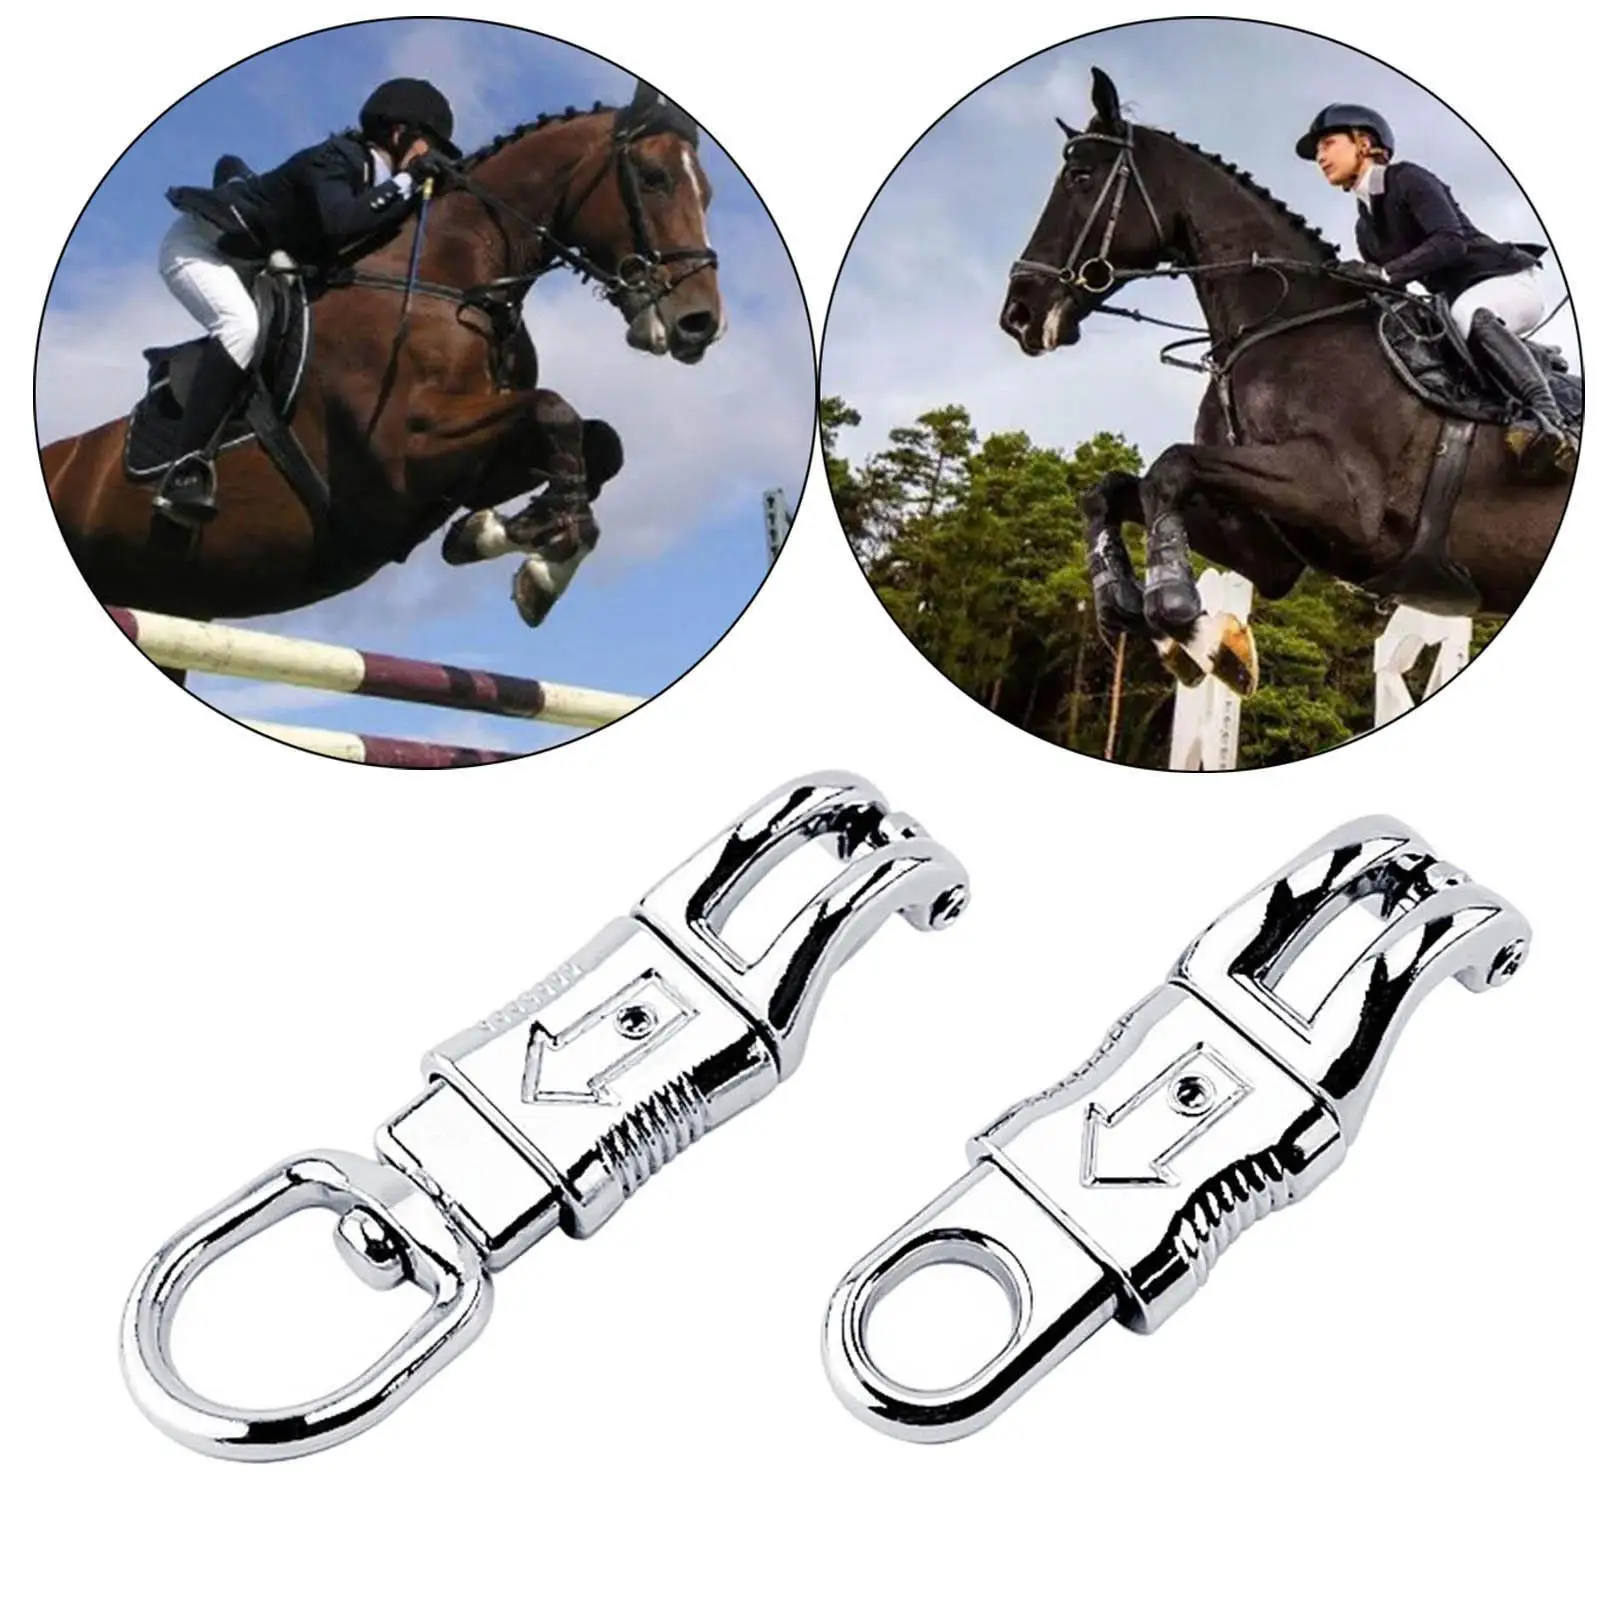 Panic Snap for Paracord Quick Release Heavy Duty Equestrian Leads Reins Hook Clips Buckles for Horse Riding Get Back whips